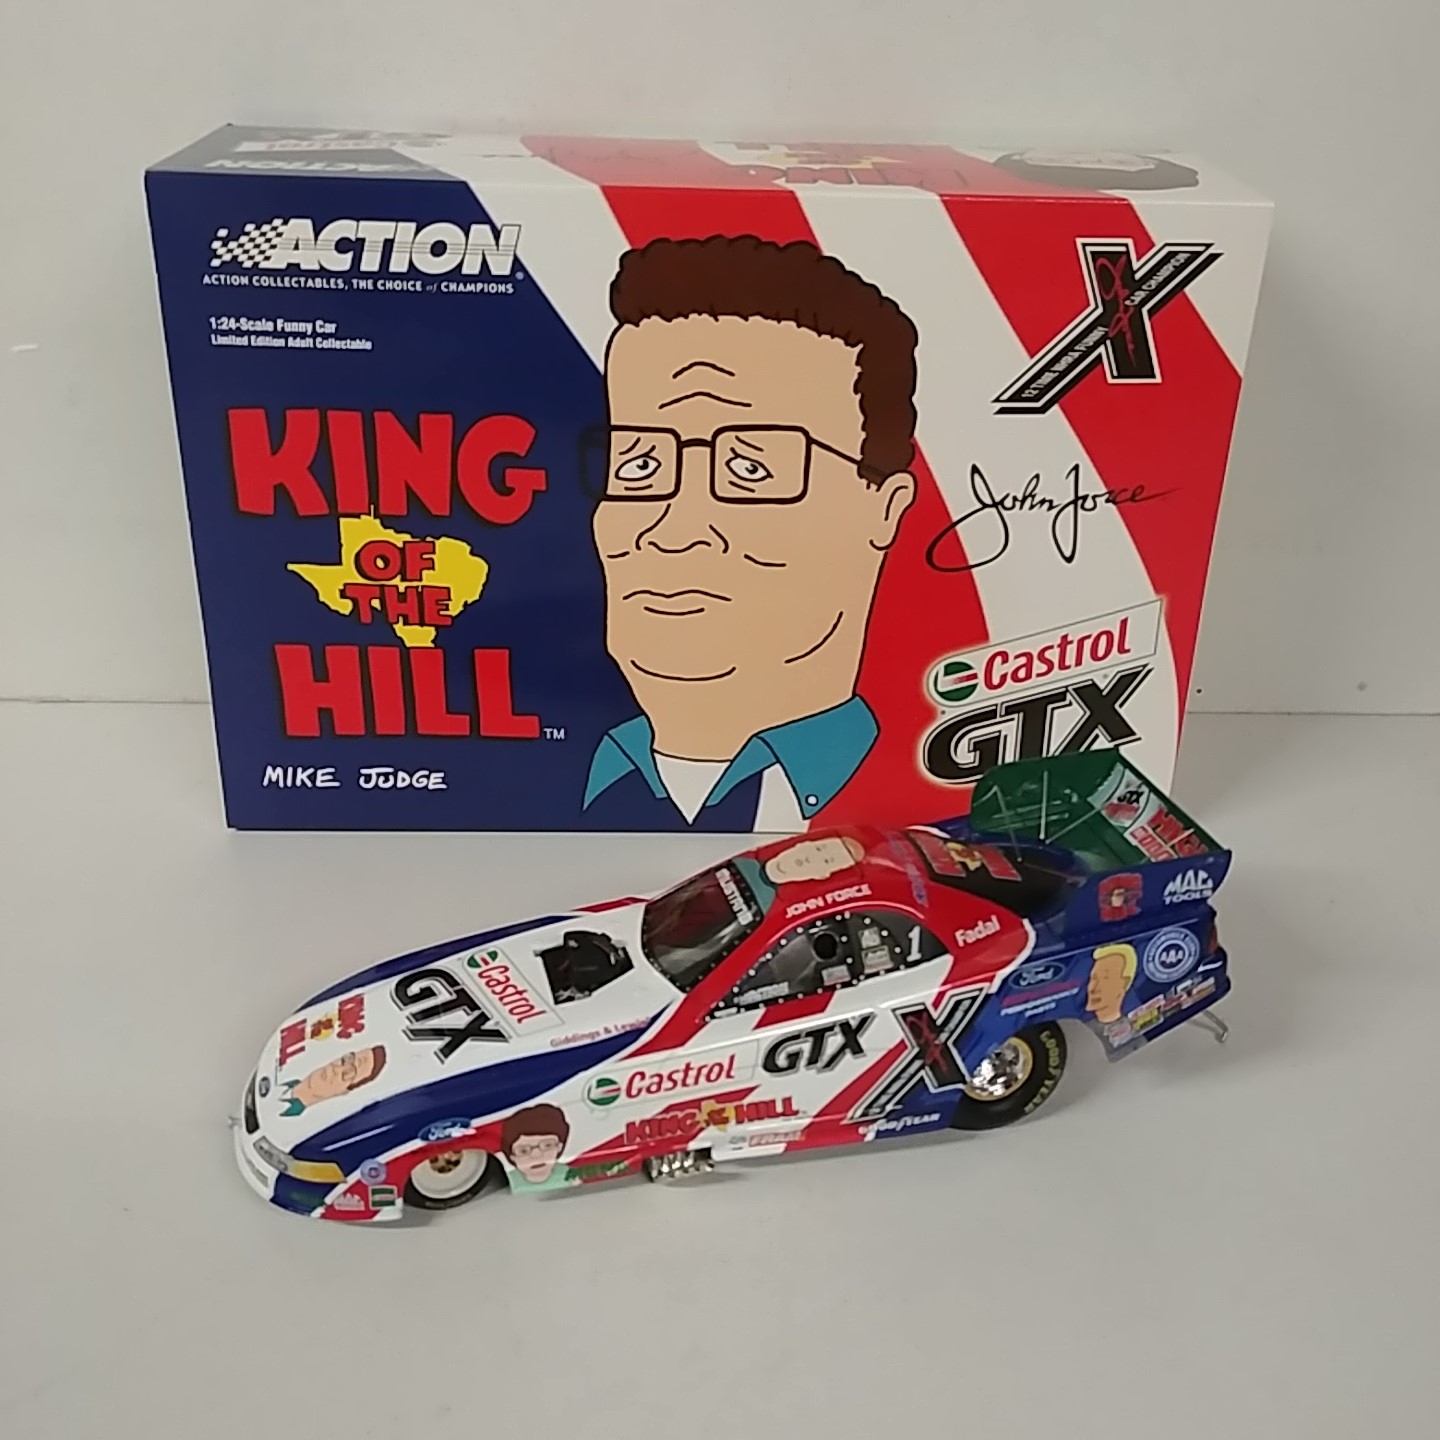 2003 John Force 1/24th Castrol GTX "King of the Hill" funny car